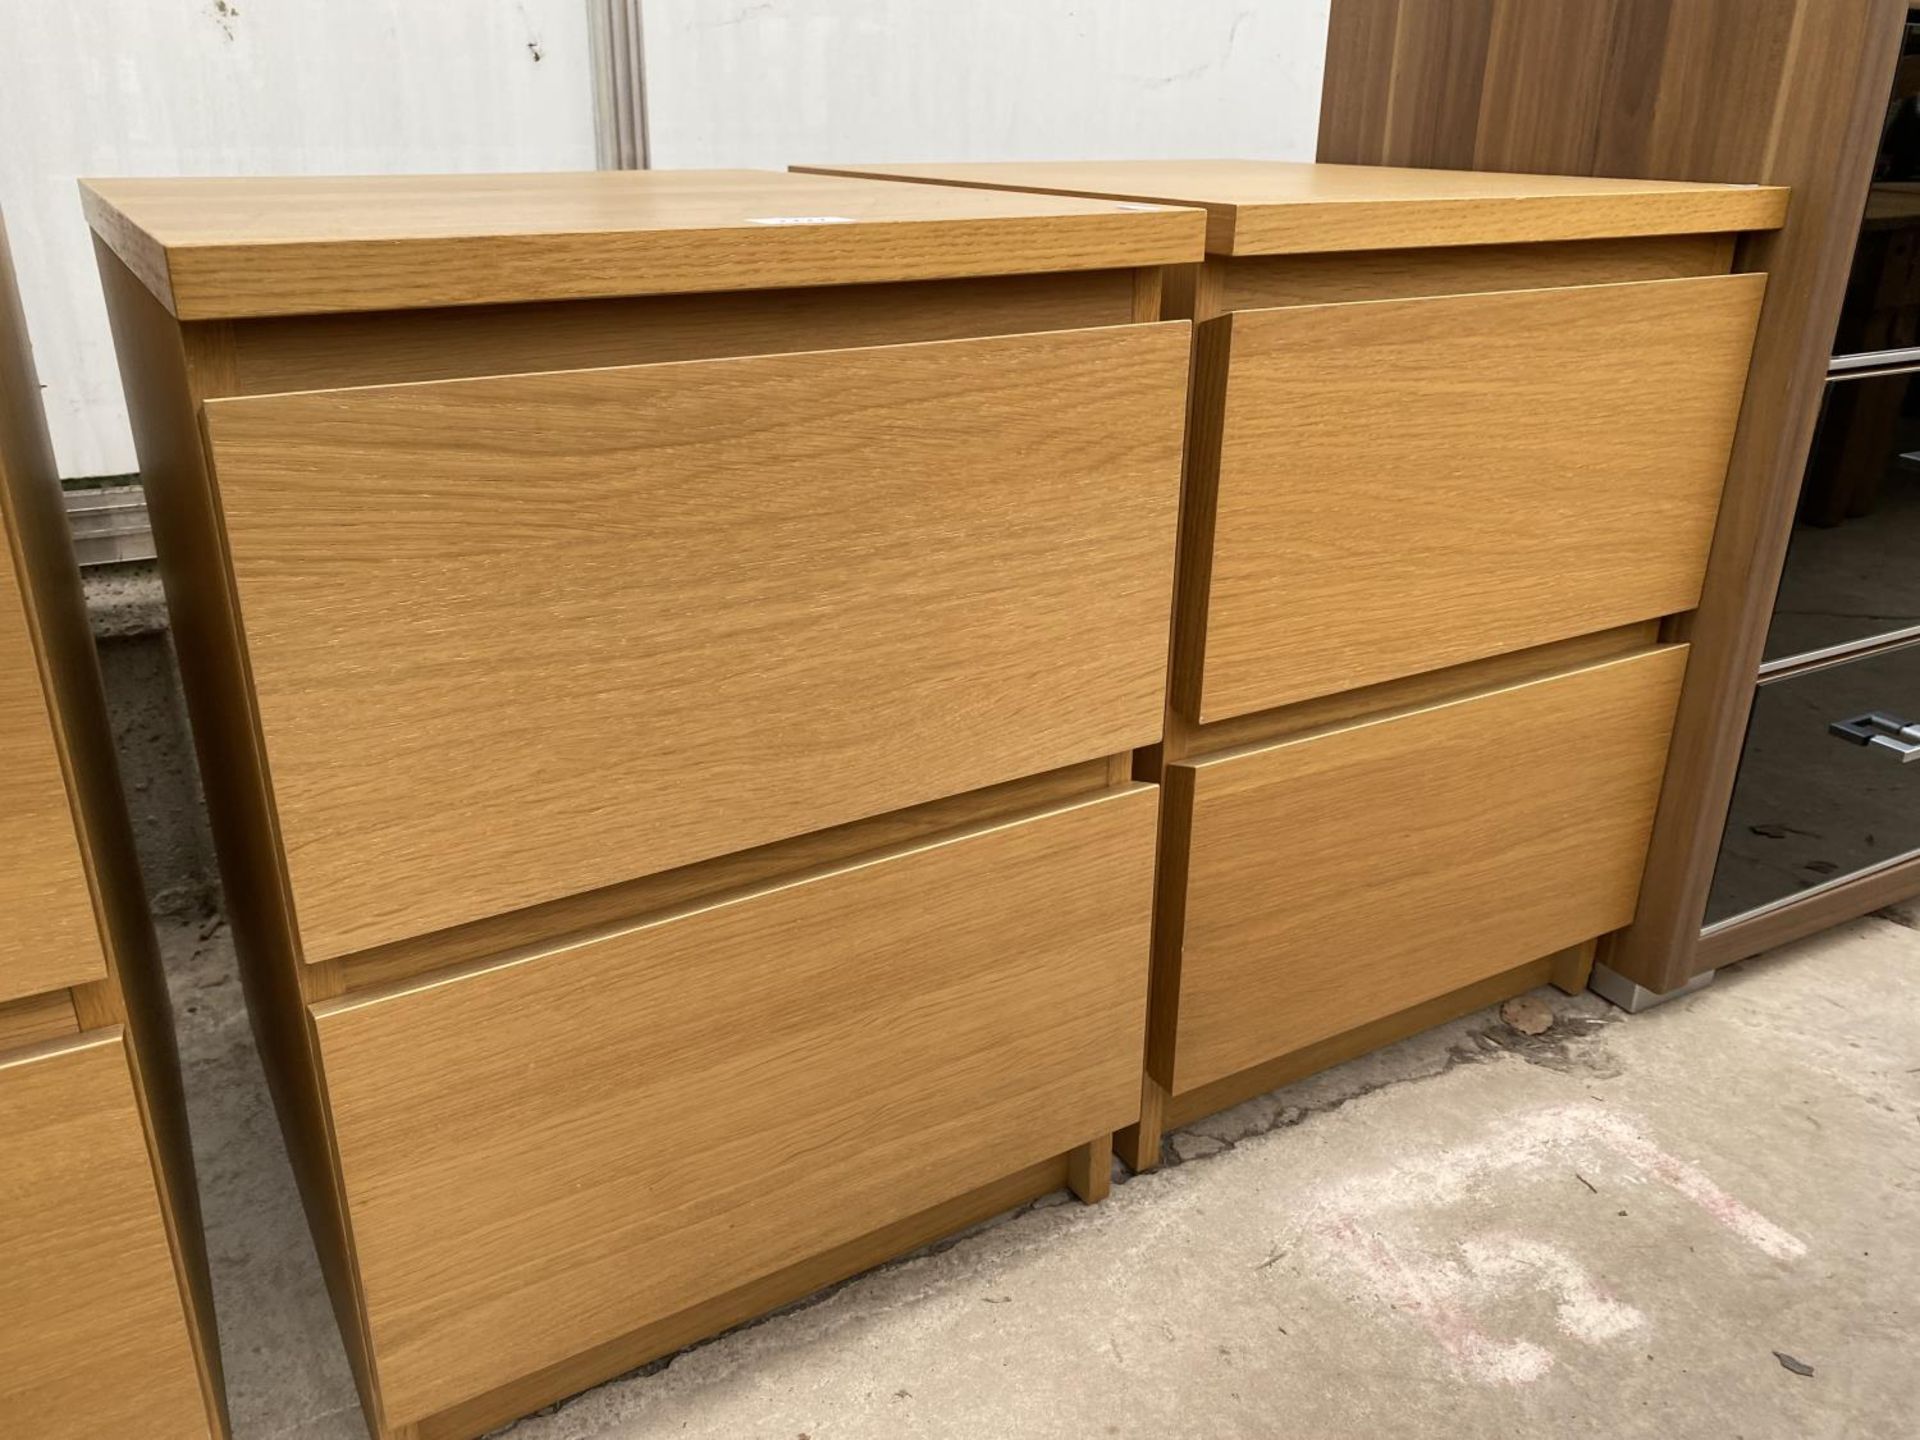 A MODERN OAK EFFECT PAIR OF BEDSIDE CHESTS, 16" WIDE EACH - Image 2 of 3